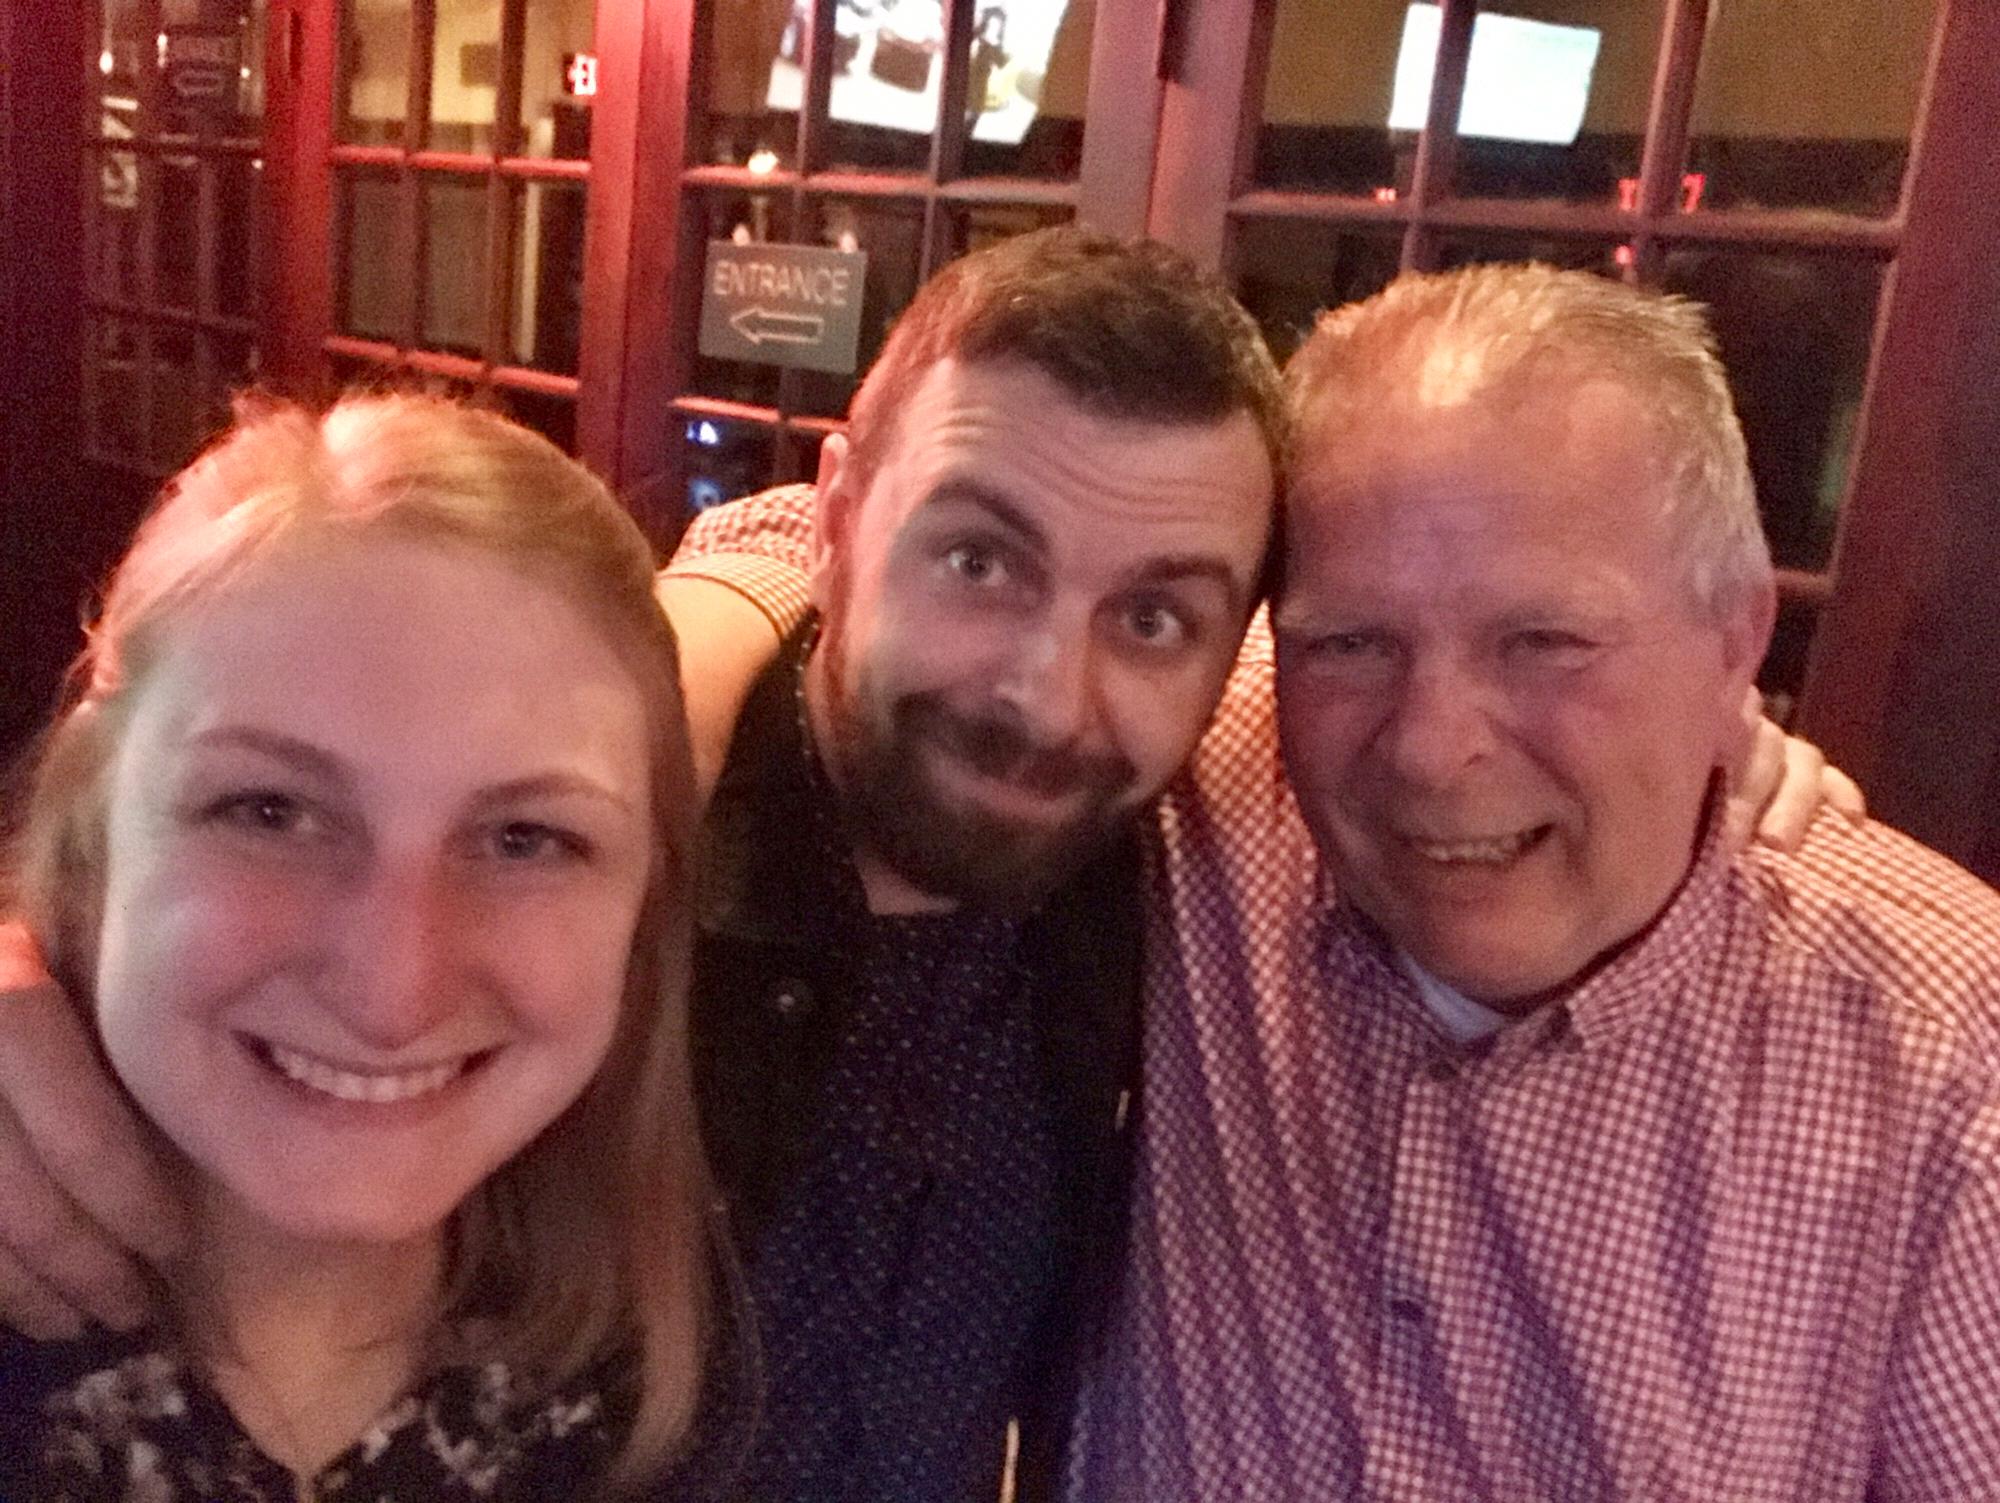 Enjoying a night out with David’s dad!